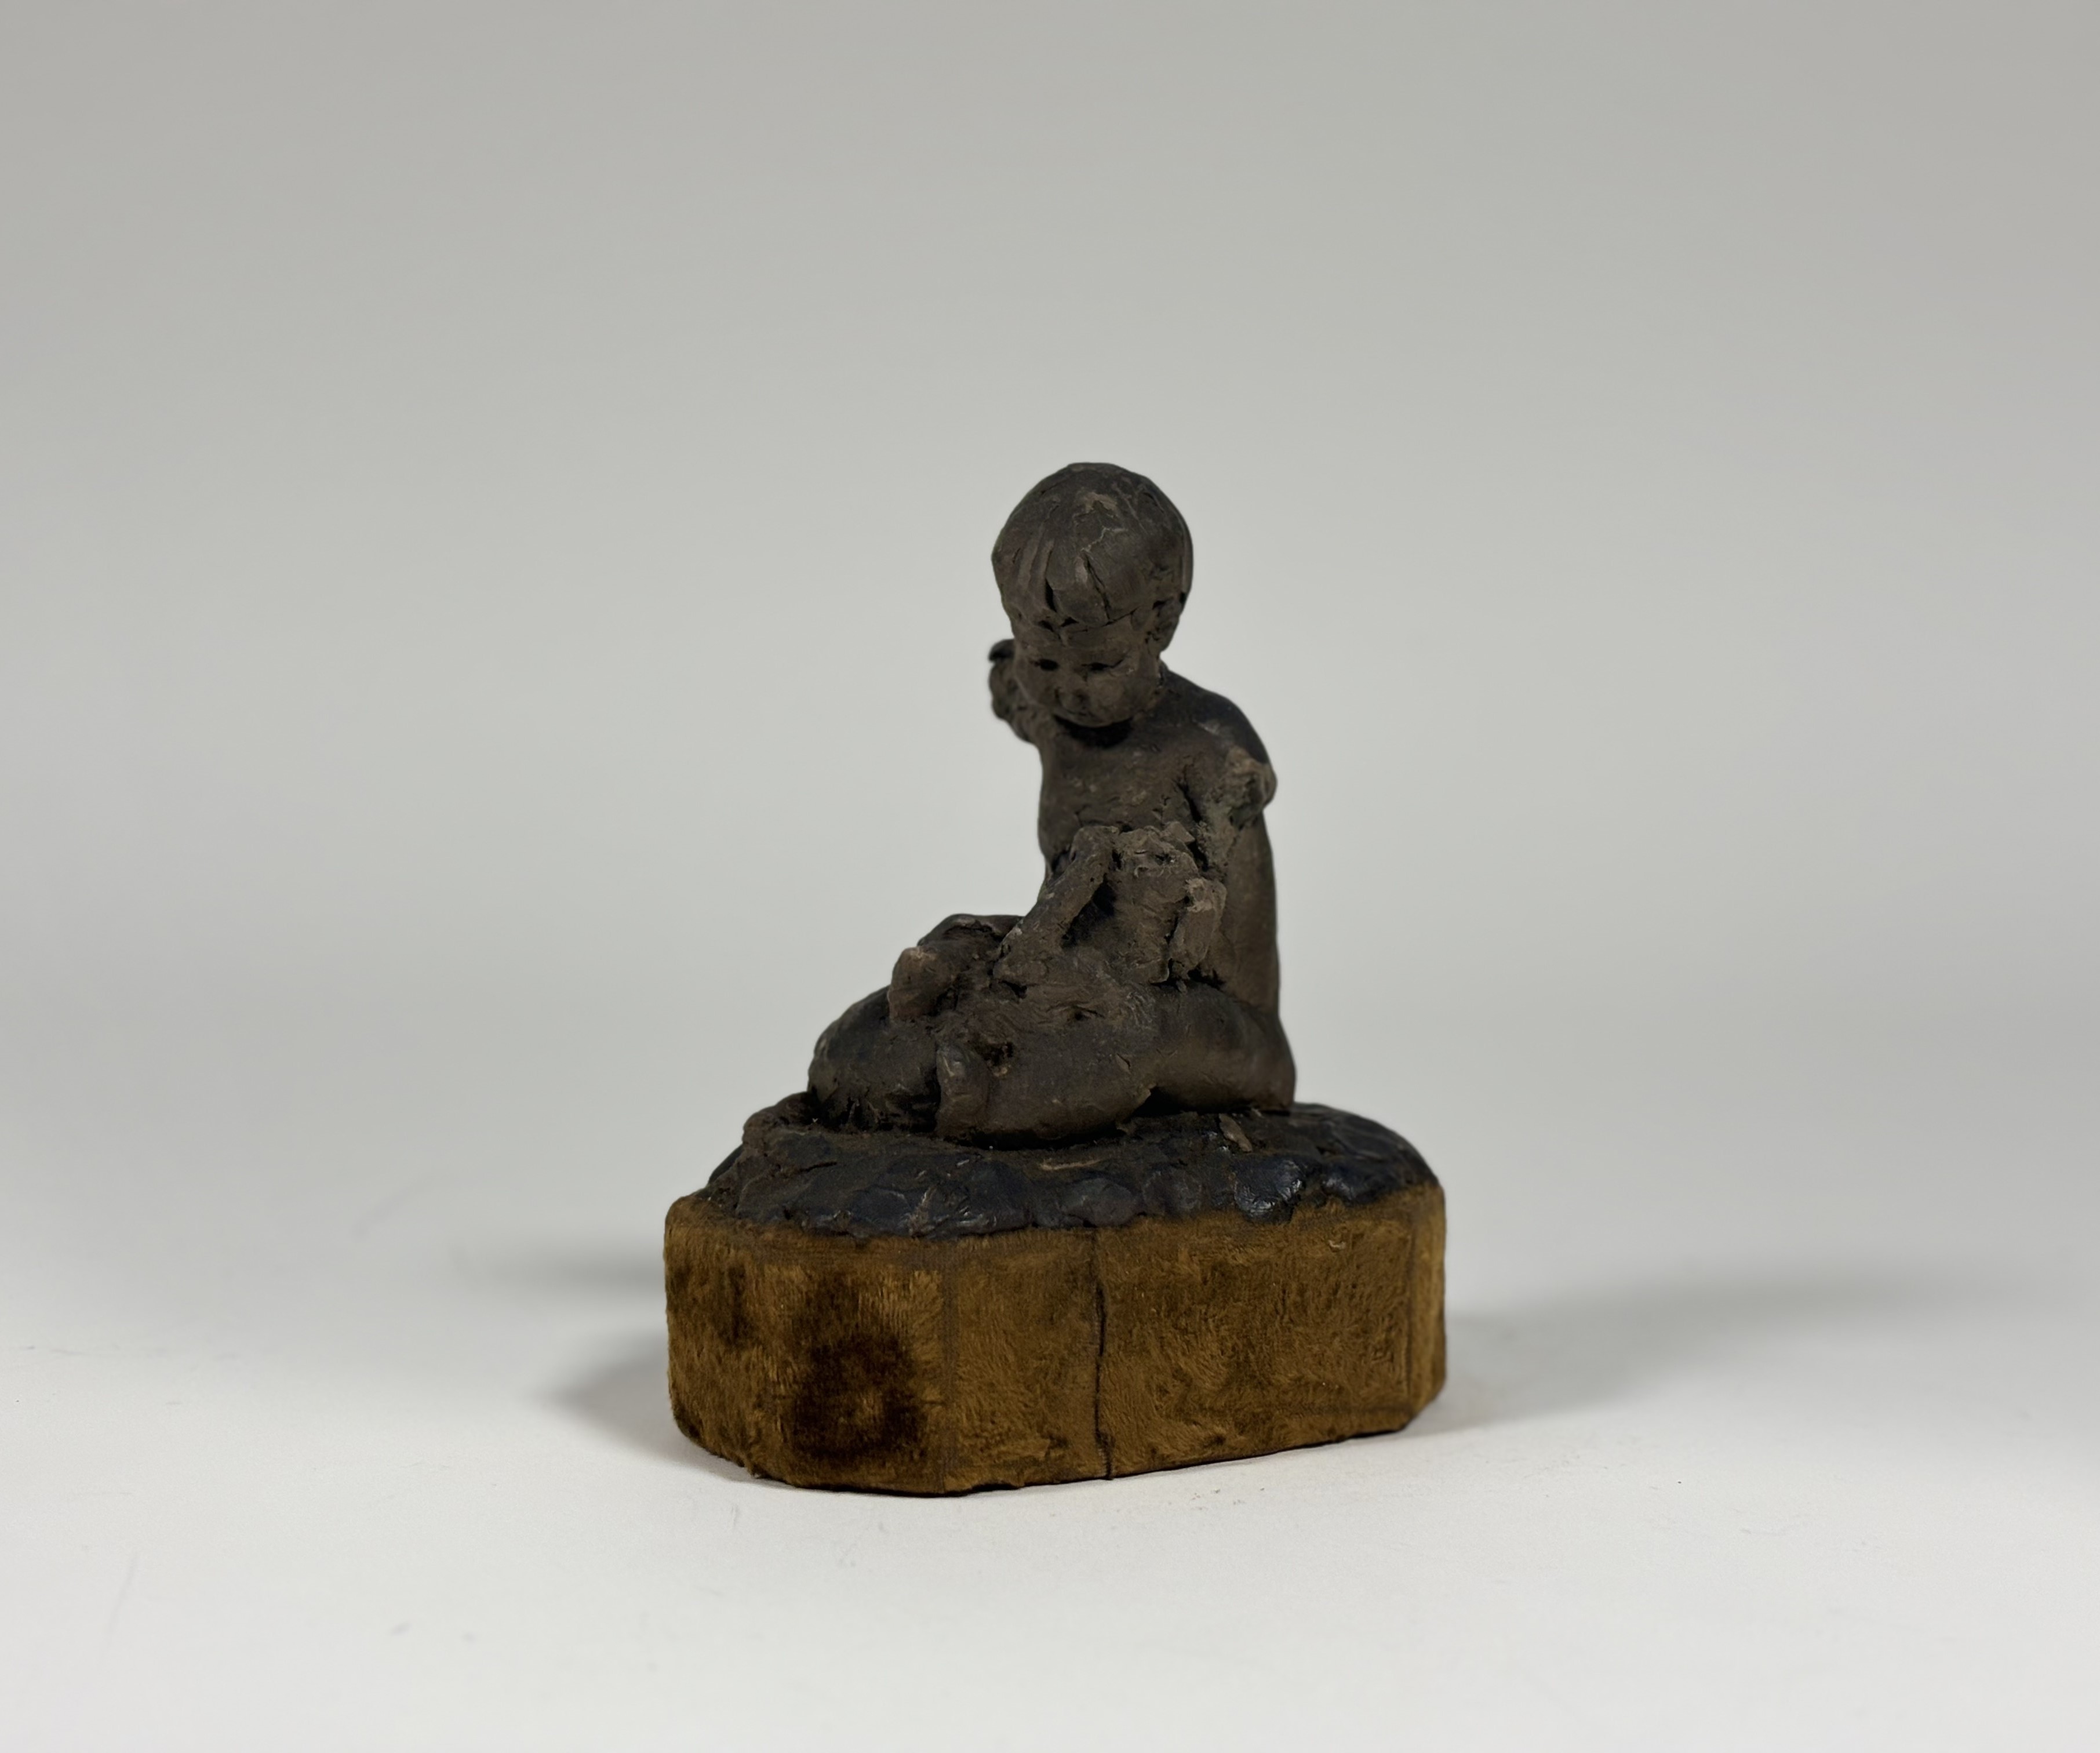 Attributed to Sophia Rosamond Praeger M.B.E. (Irish, 1867-1954), a wax maquette of a Child with a